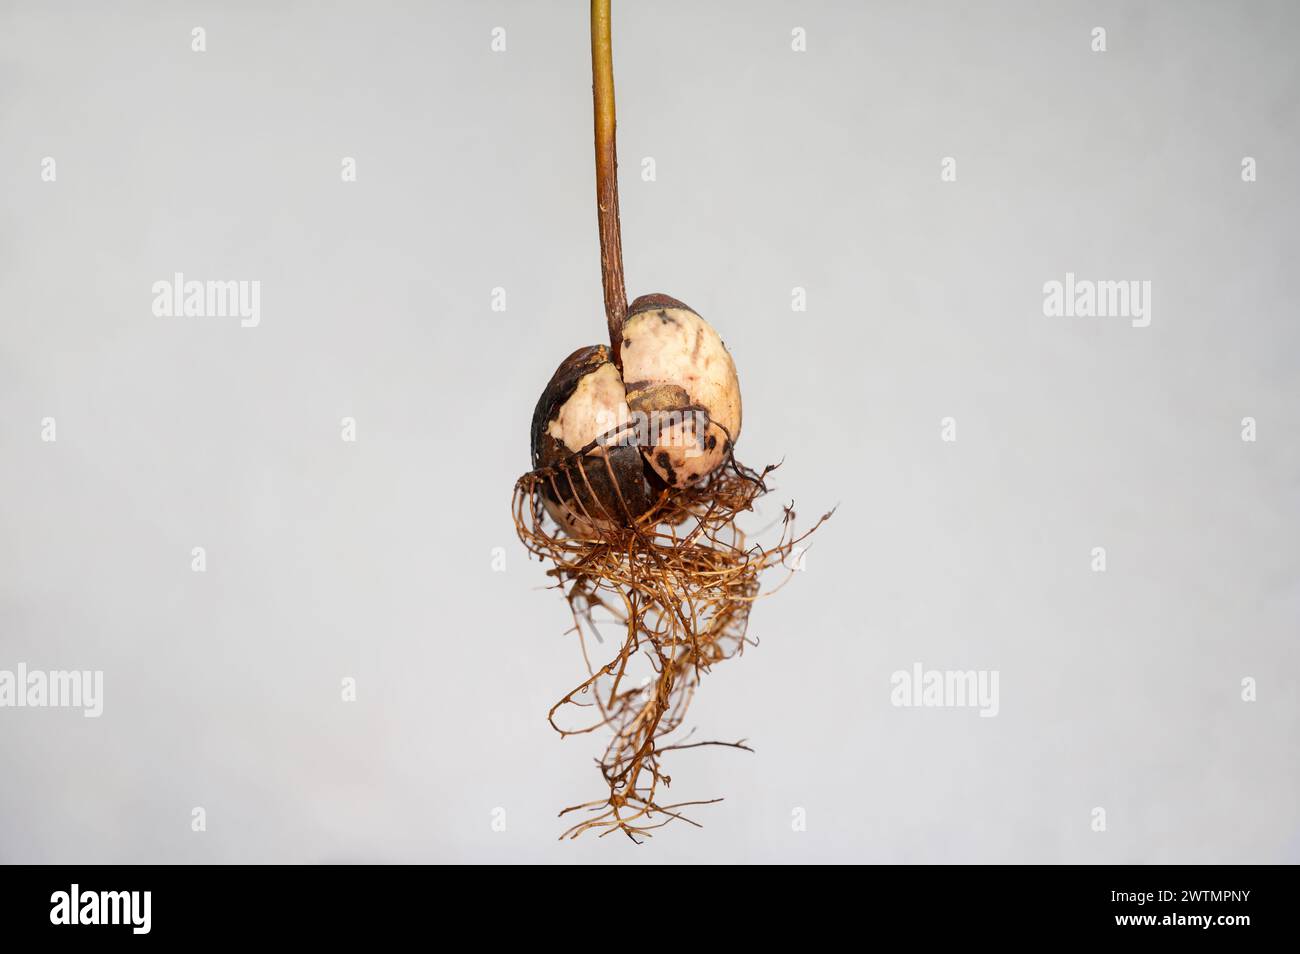 Avocado (Persea americana) core with roots against white background Stock Photo